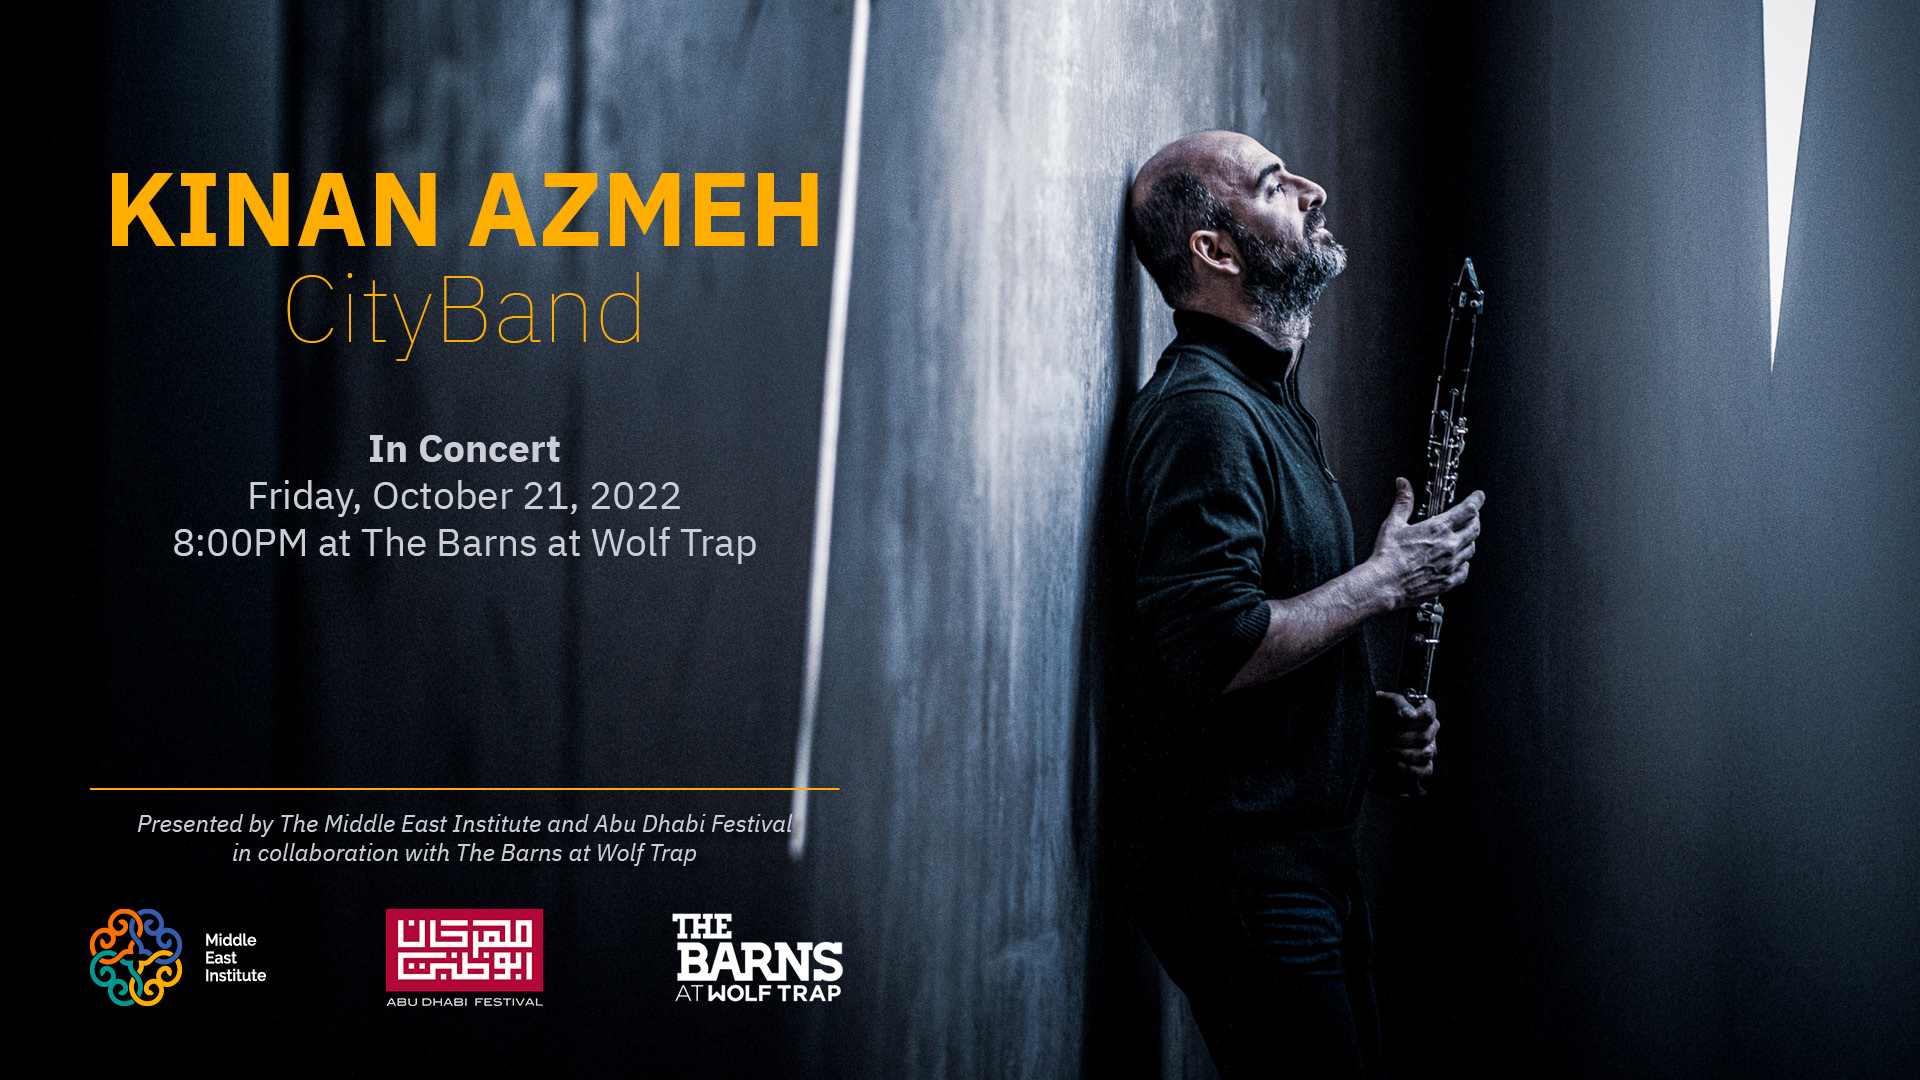 Kinan Azmeh CityBand at The Barns at Wolf Trap. Tickets on sale now.